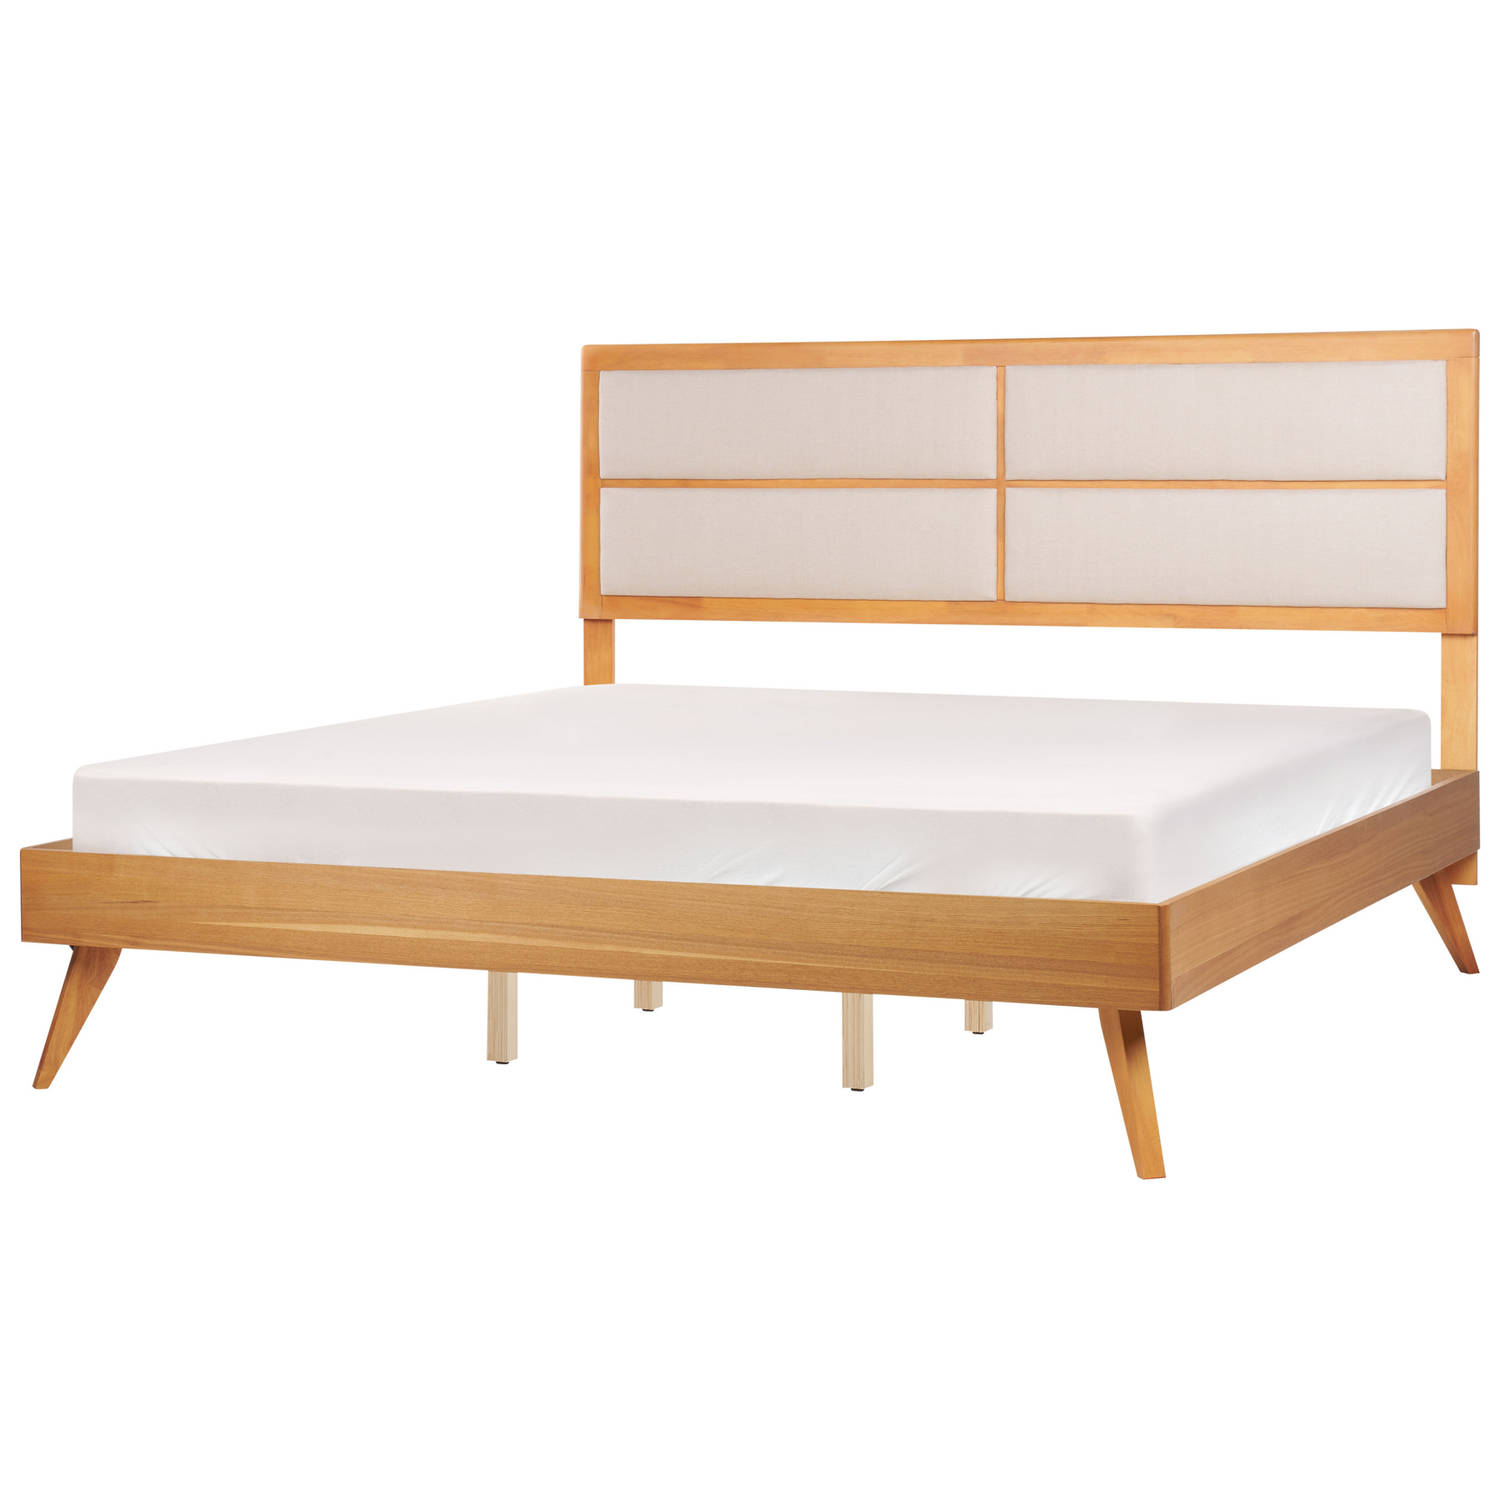 POISSY - Tweepersoonsbed - Lichthout - 180 x 200 cm - MDF